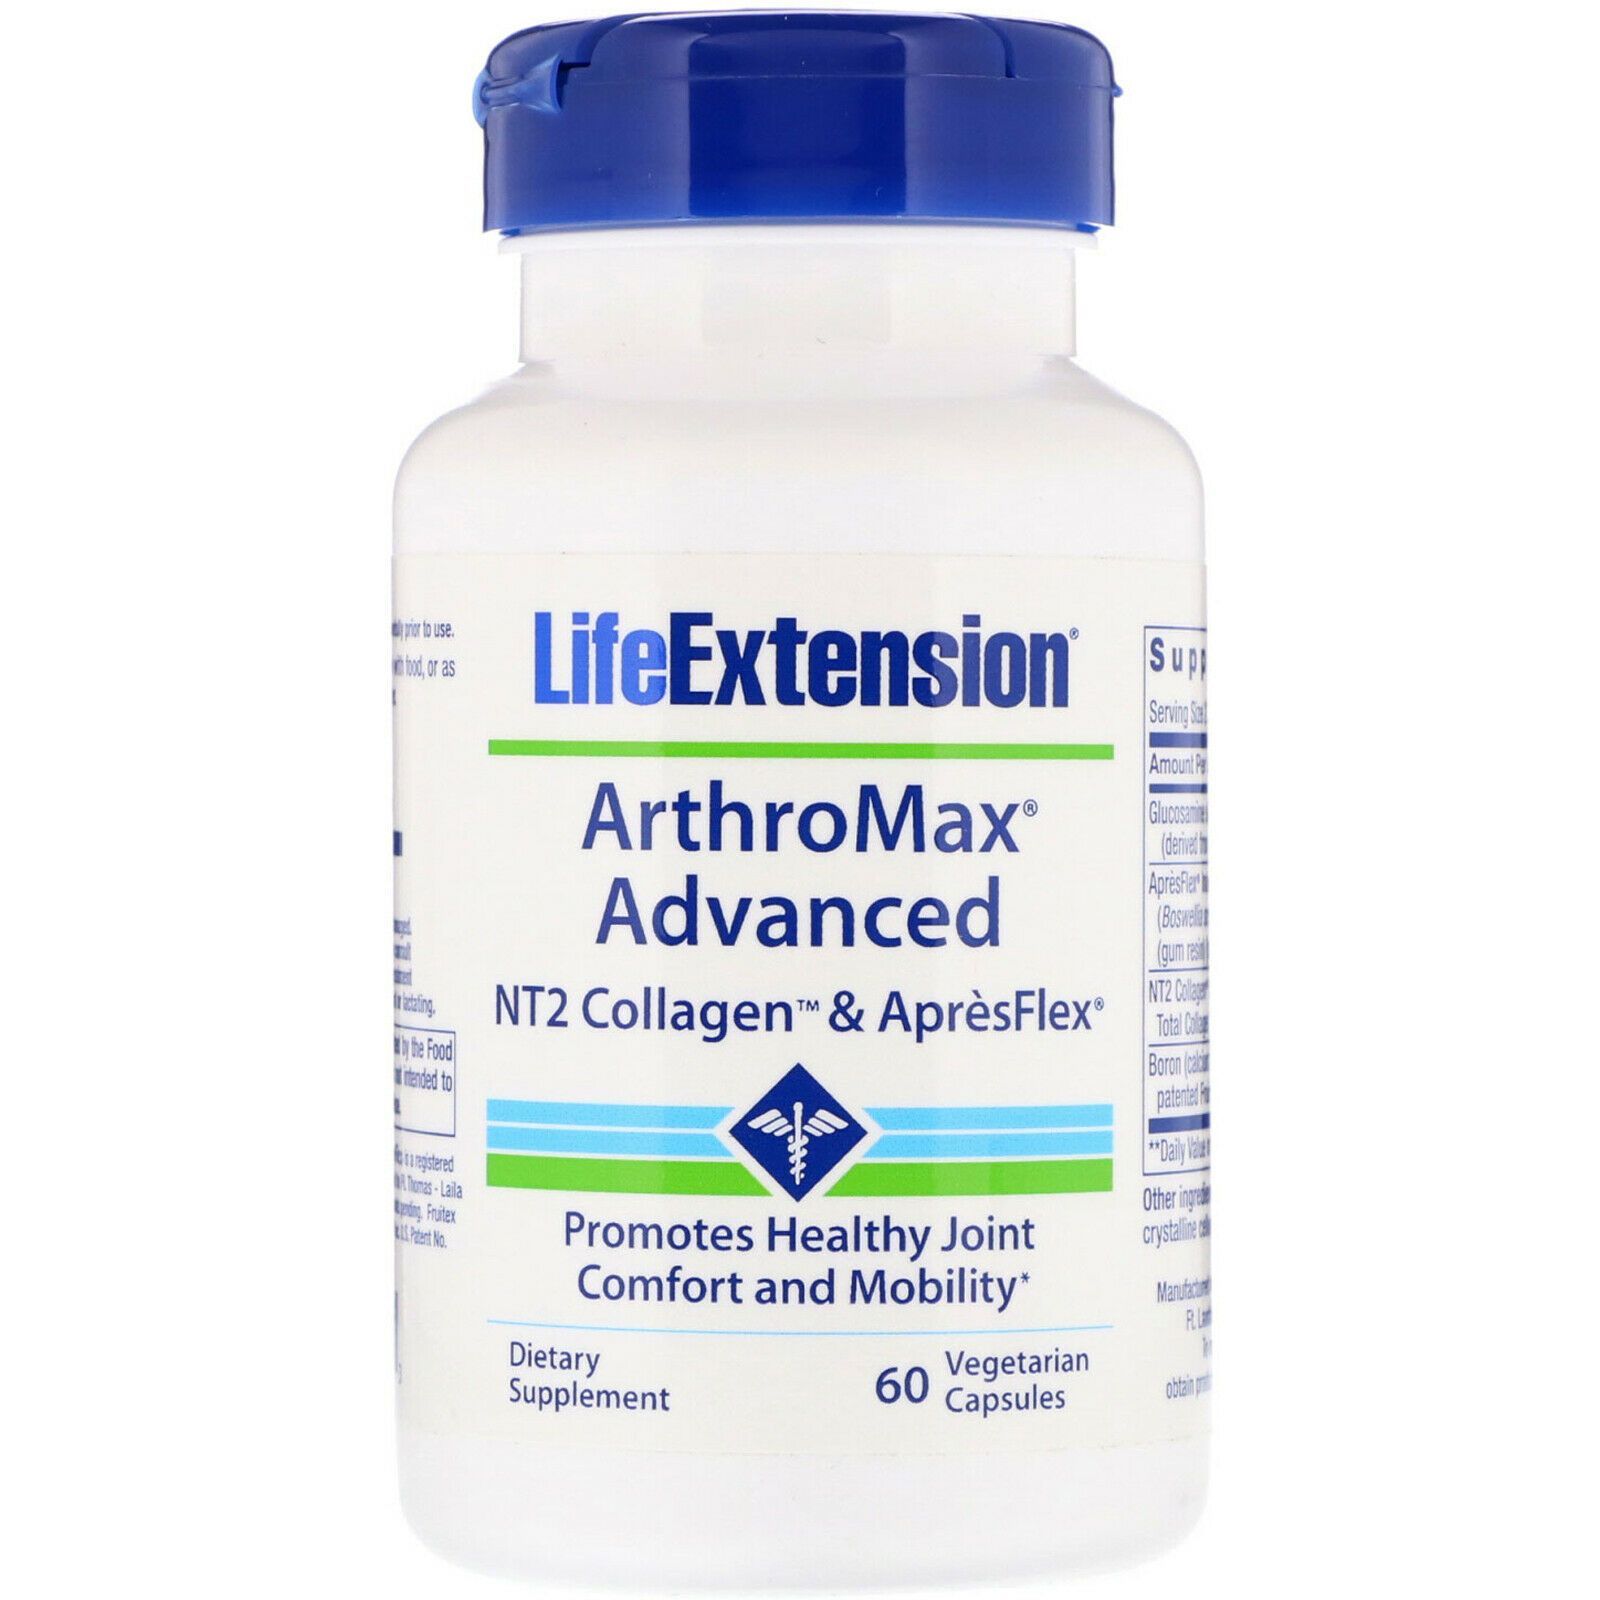 Life extension. Life Extension витамины two-per-Day. Life Extension super Selenium Complex. Life Extension Суперкомплекс. Two-per-Day Multivitamin, 120 Tablets.